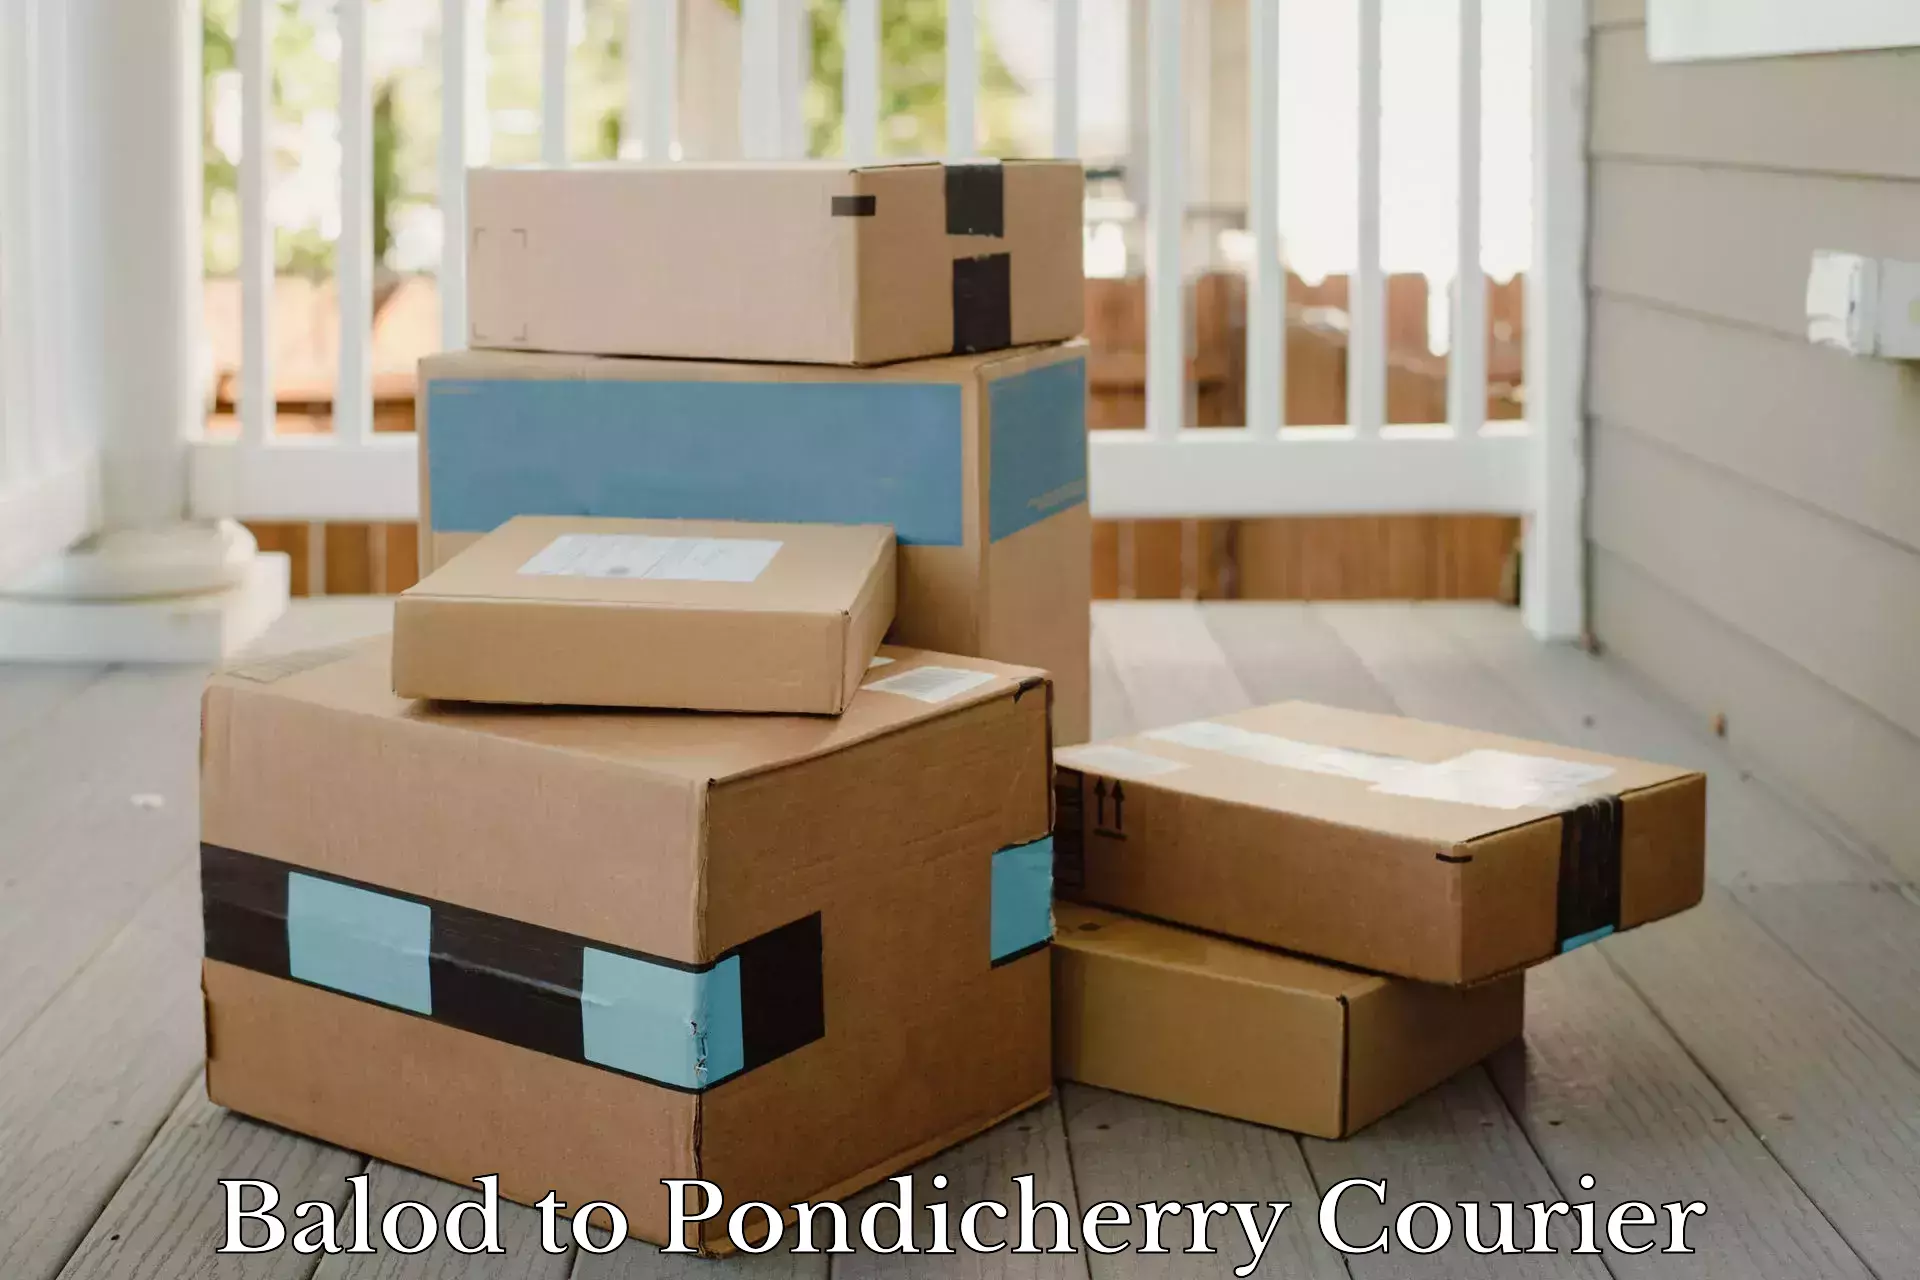 Sustainable courier practices Balod to Pondicherry